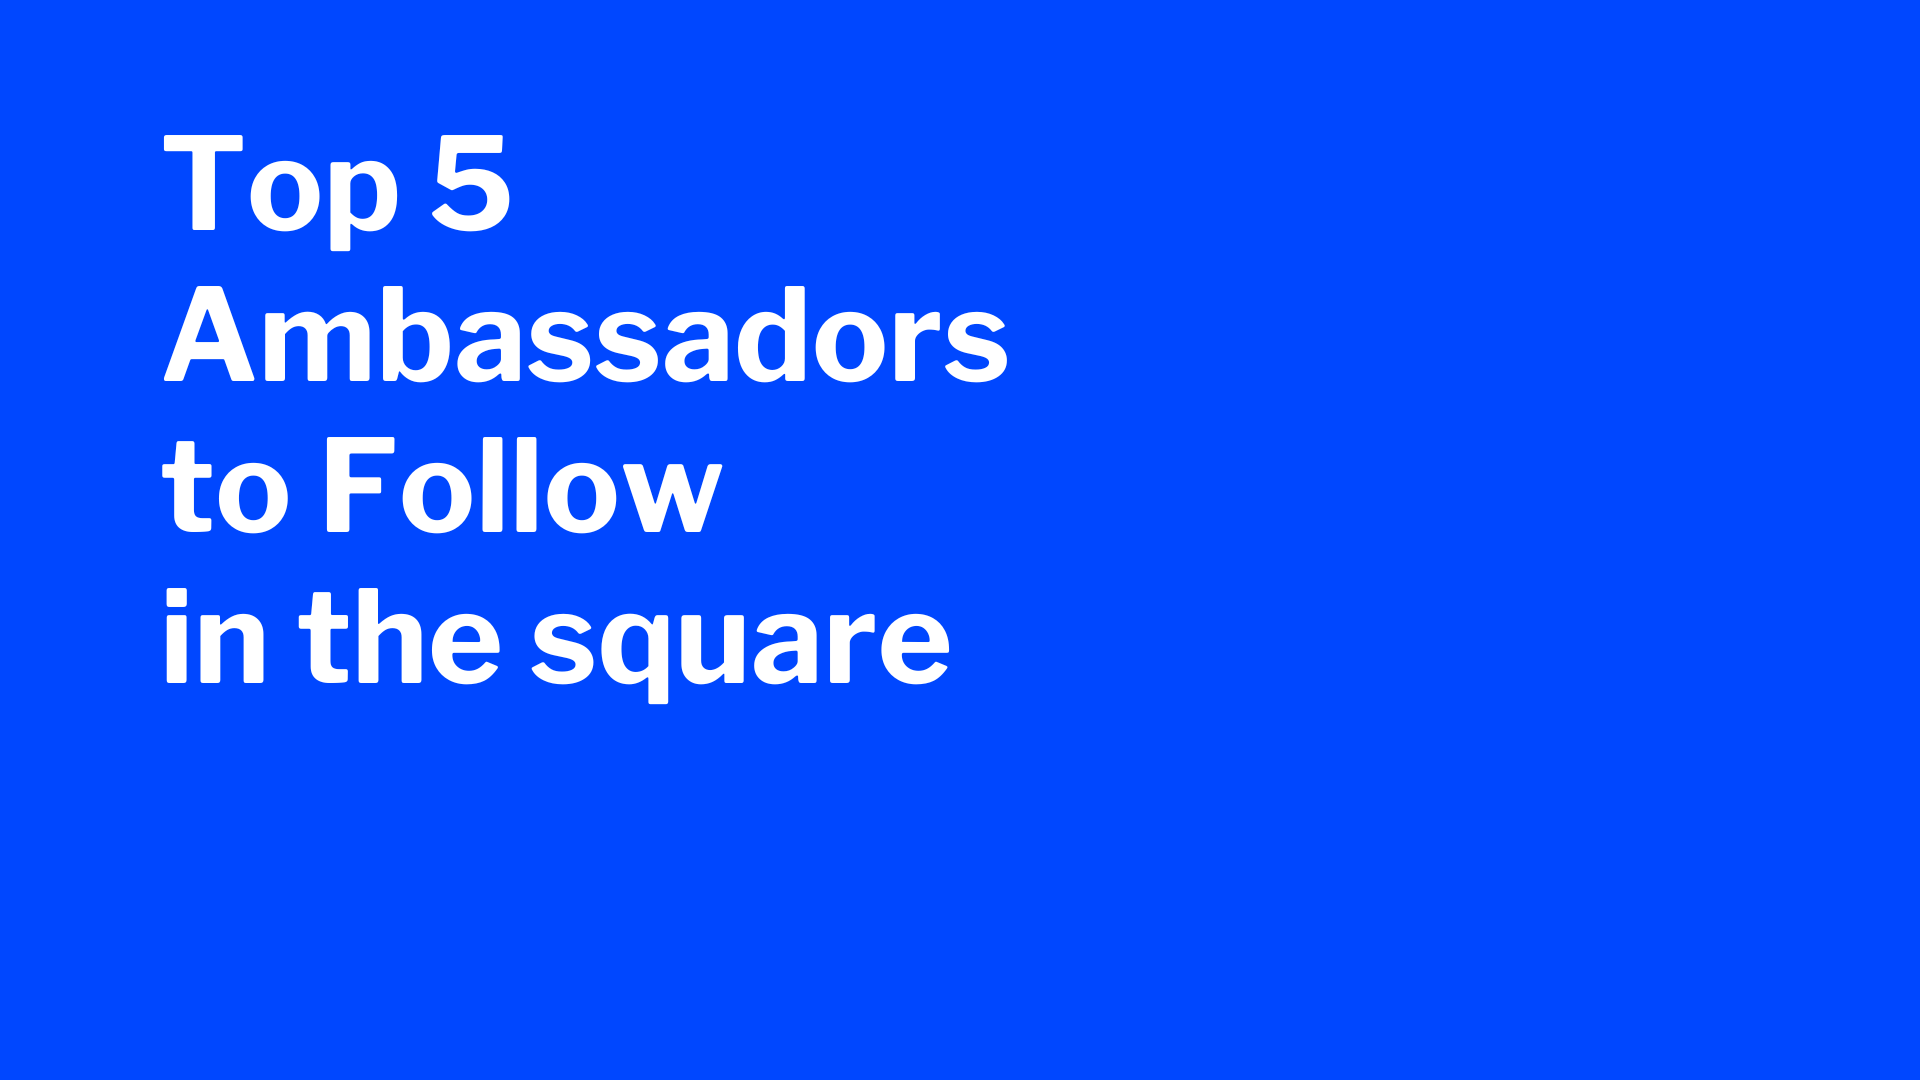 Top 5 to Follow: Ambassadors in the square